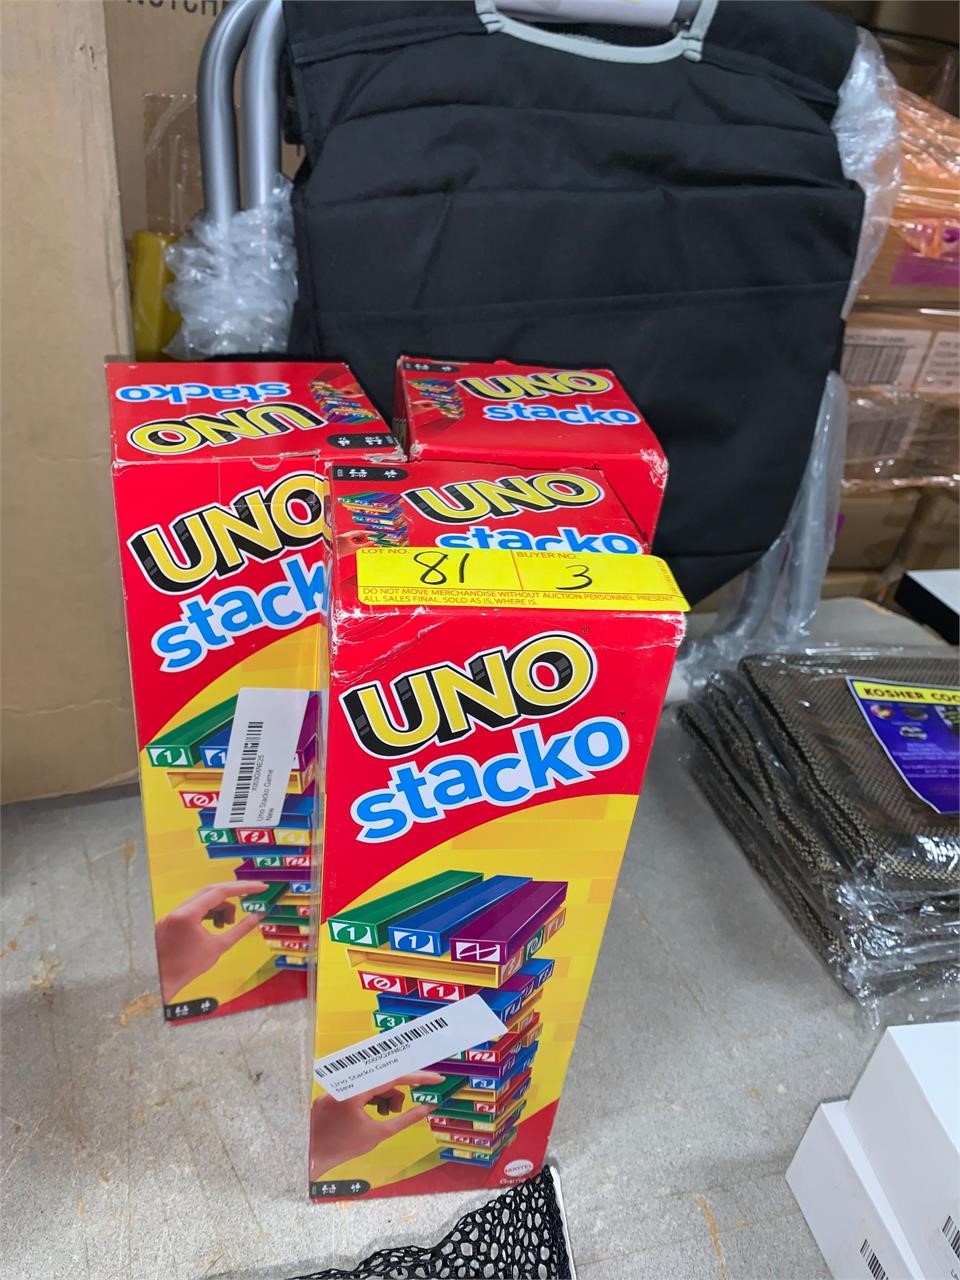 LOT OF 3 UNO STACKO GAMES